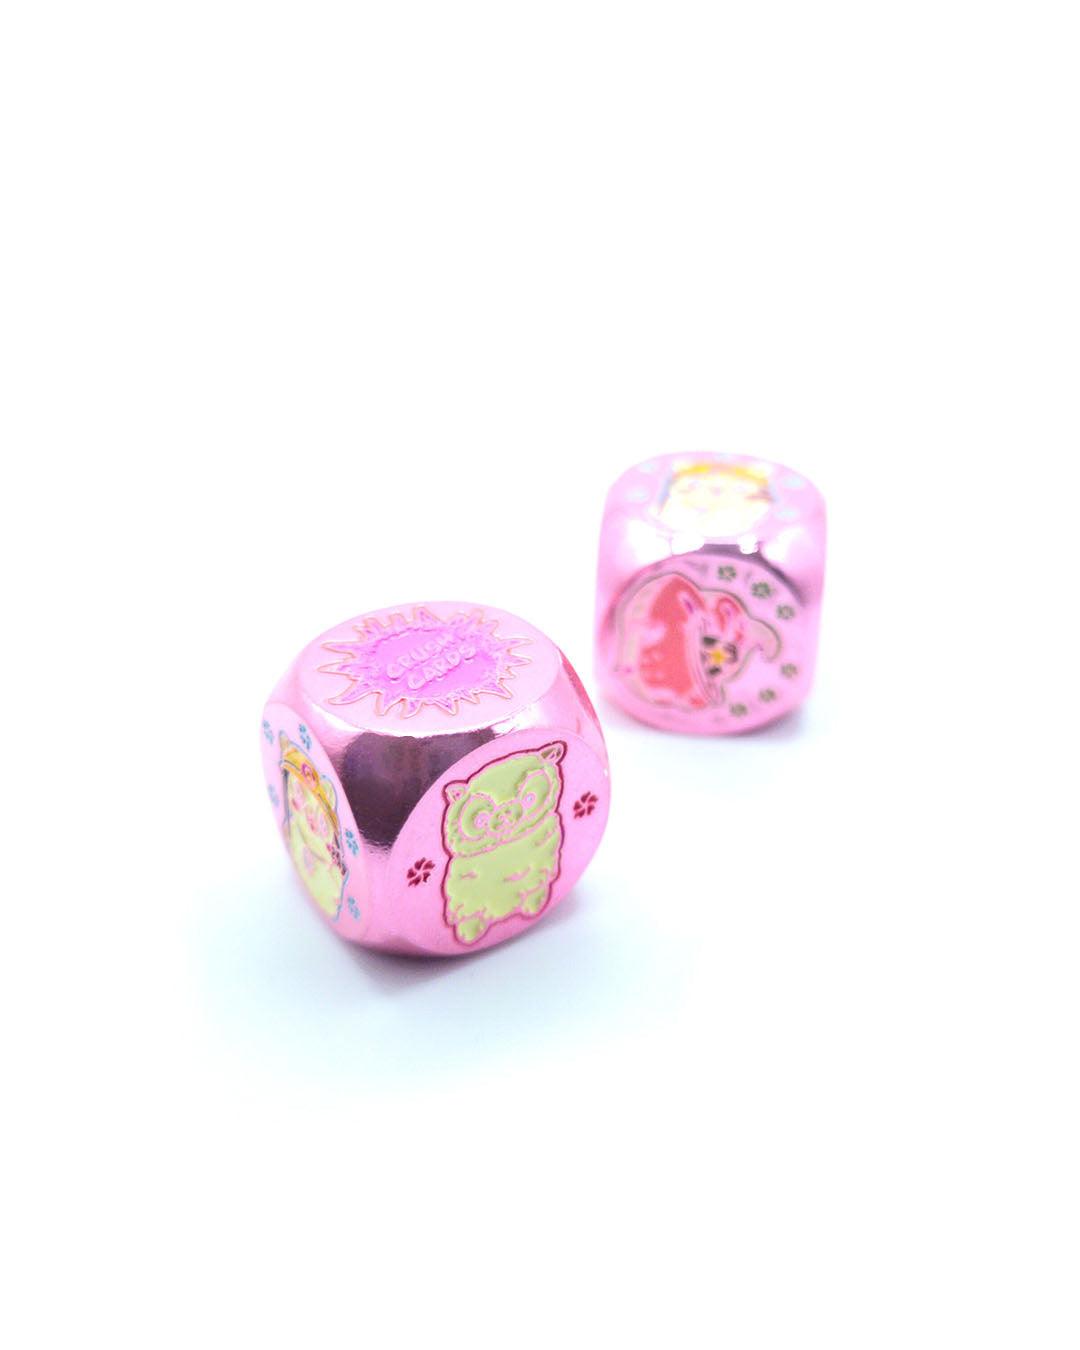 LIMITED: 'Paca Pals' - Exclusive Crush Cards Metal Dice Set - Starlight Grotto